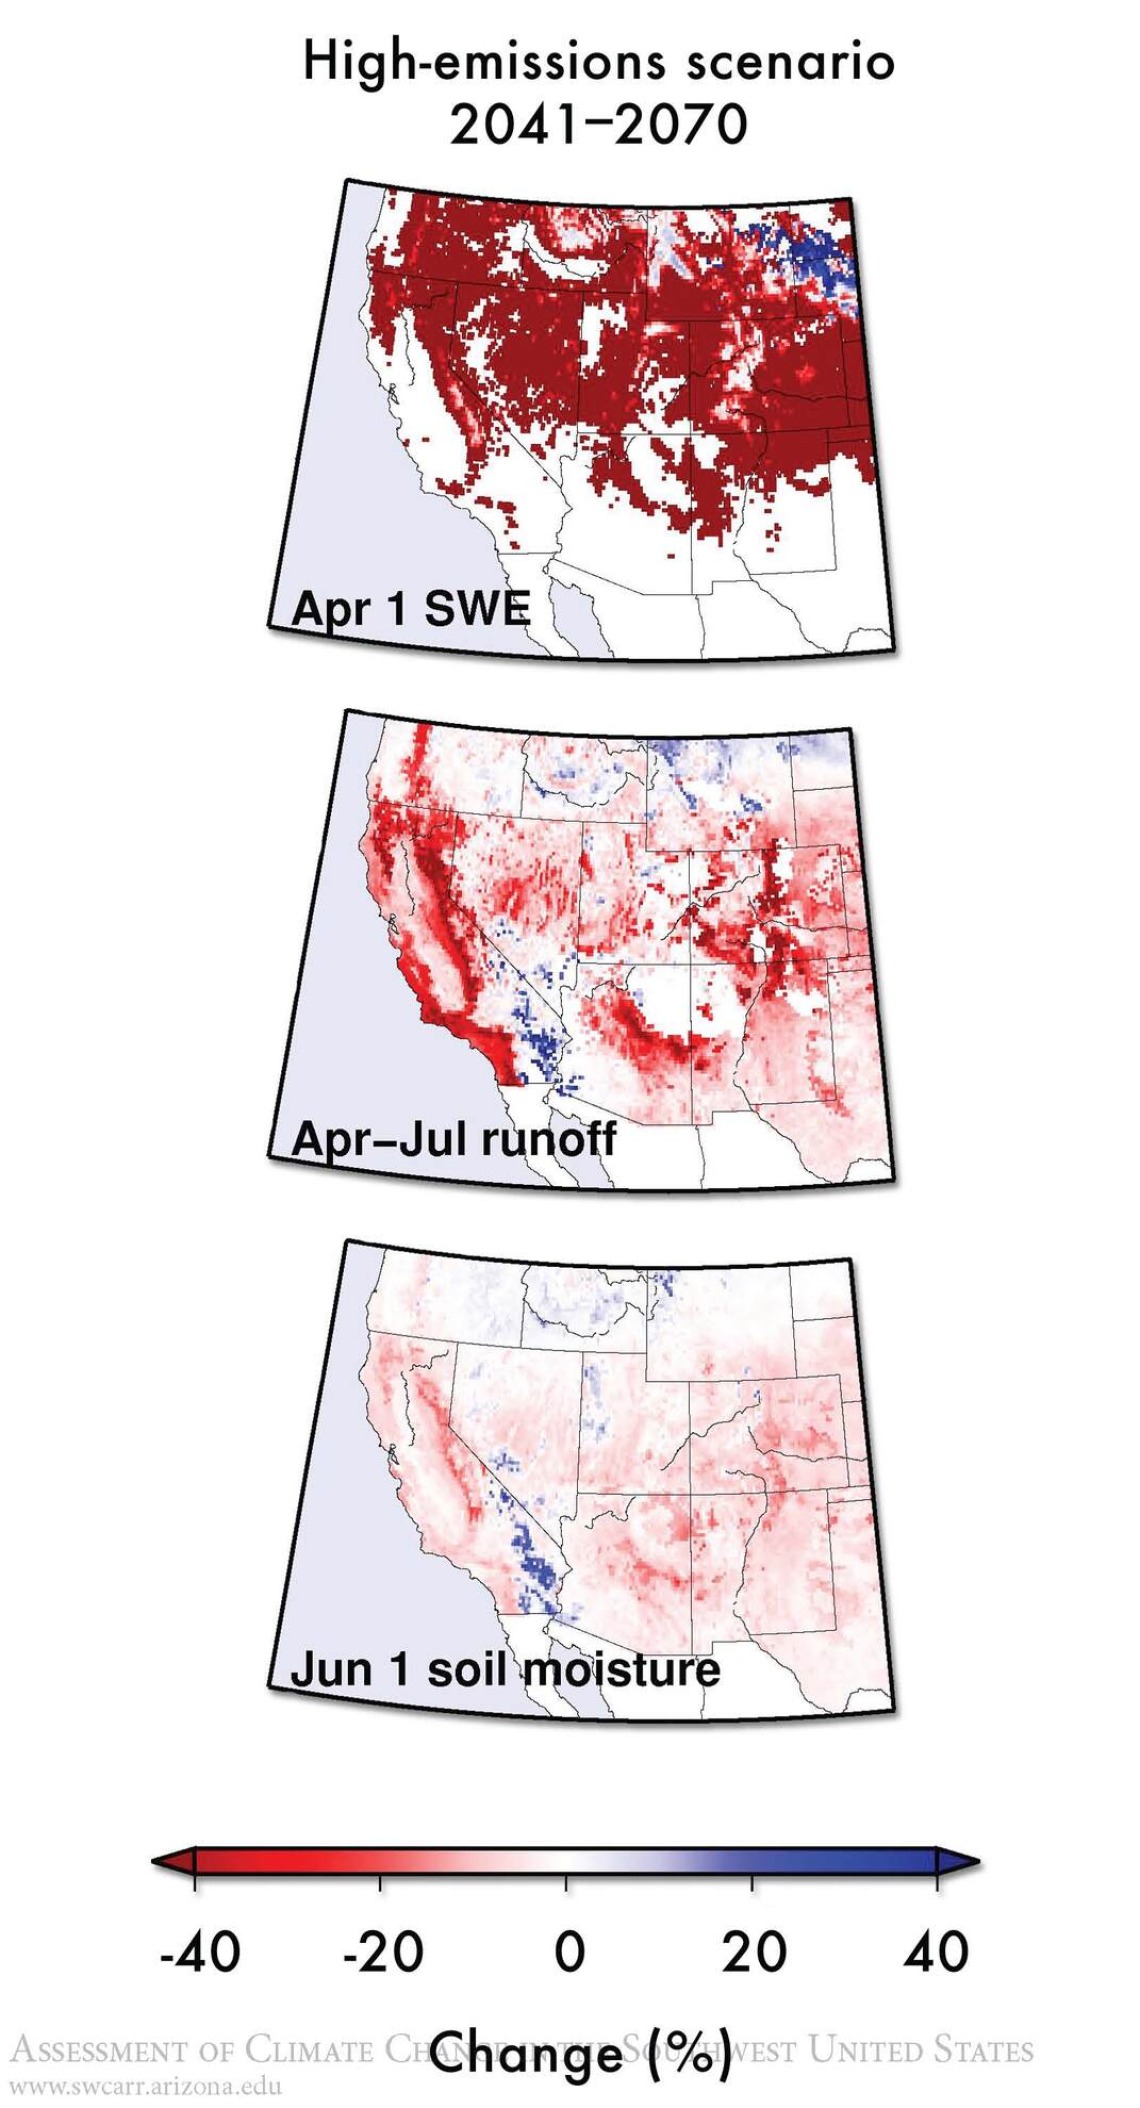 Figure 9 from Chapter 6 of Climate Assessment Report.